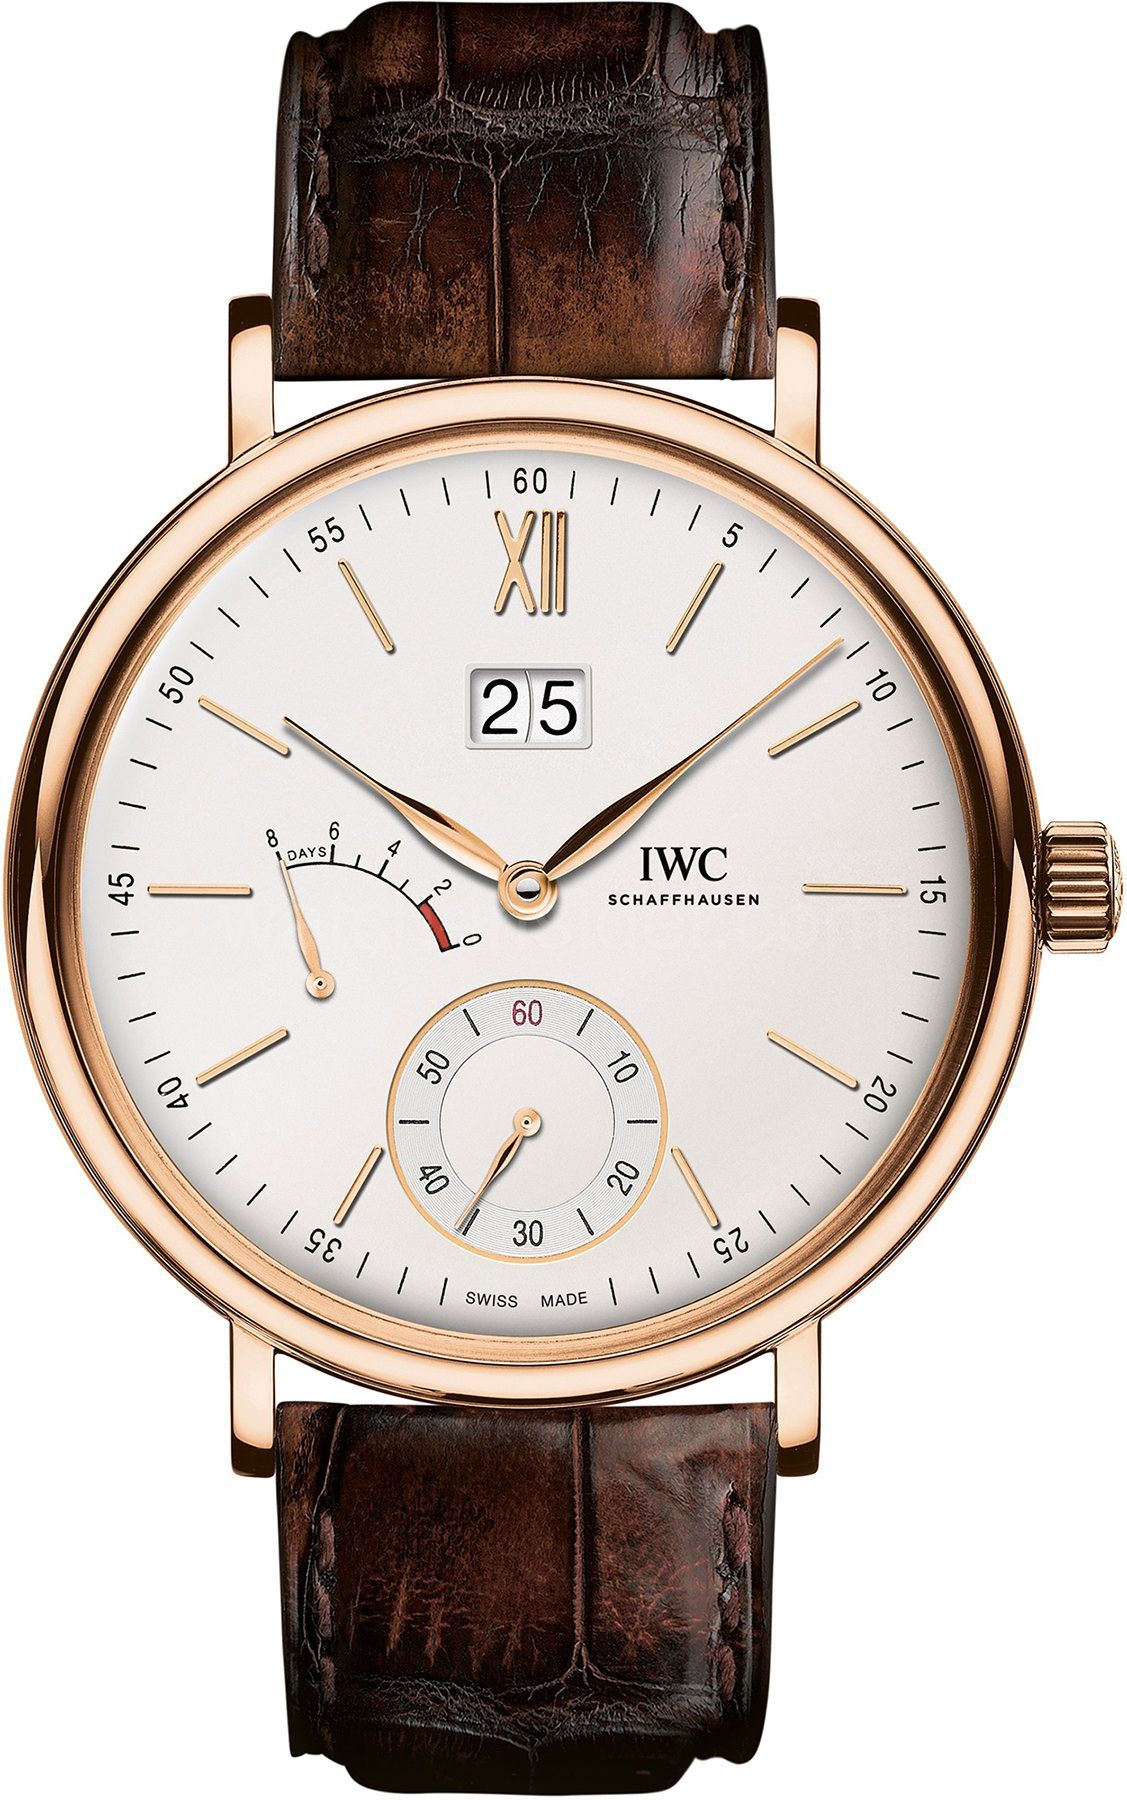 IWC Hand-Wound 45 mm Watch in White Dial For Men - 1